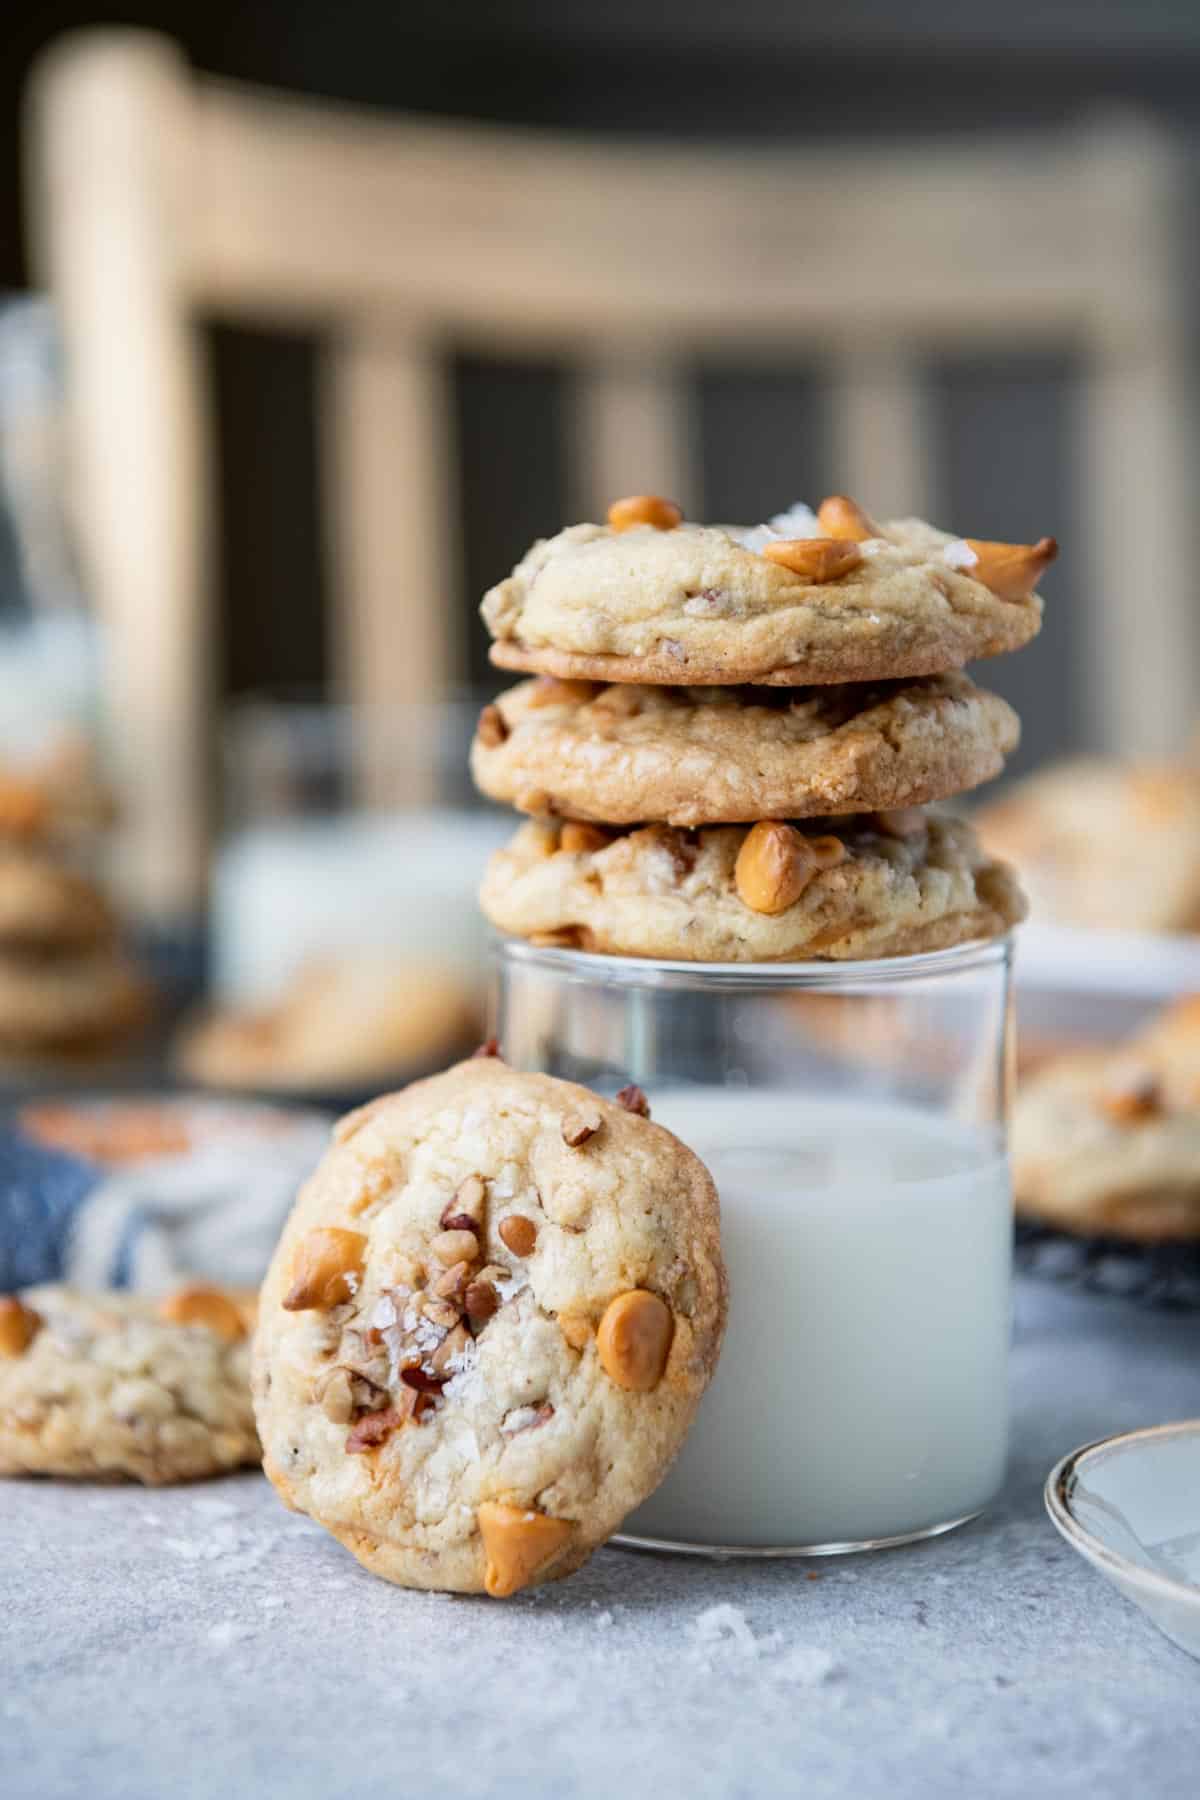 Butterscotch cookies with pecans alongside a glass of milk.